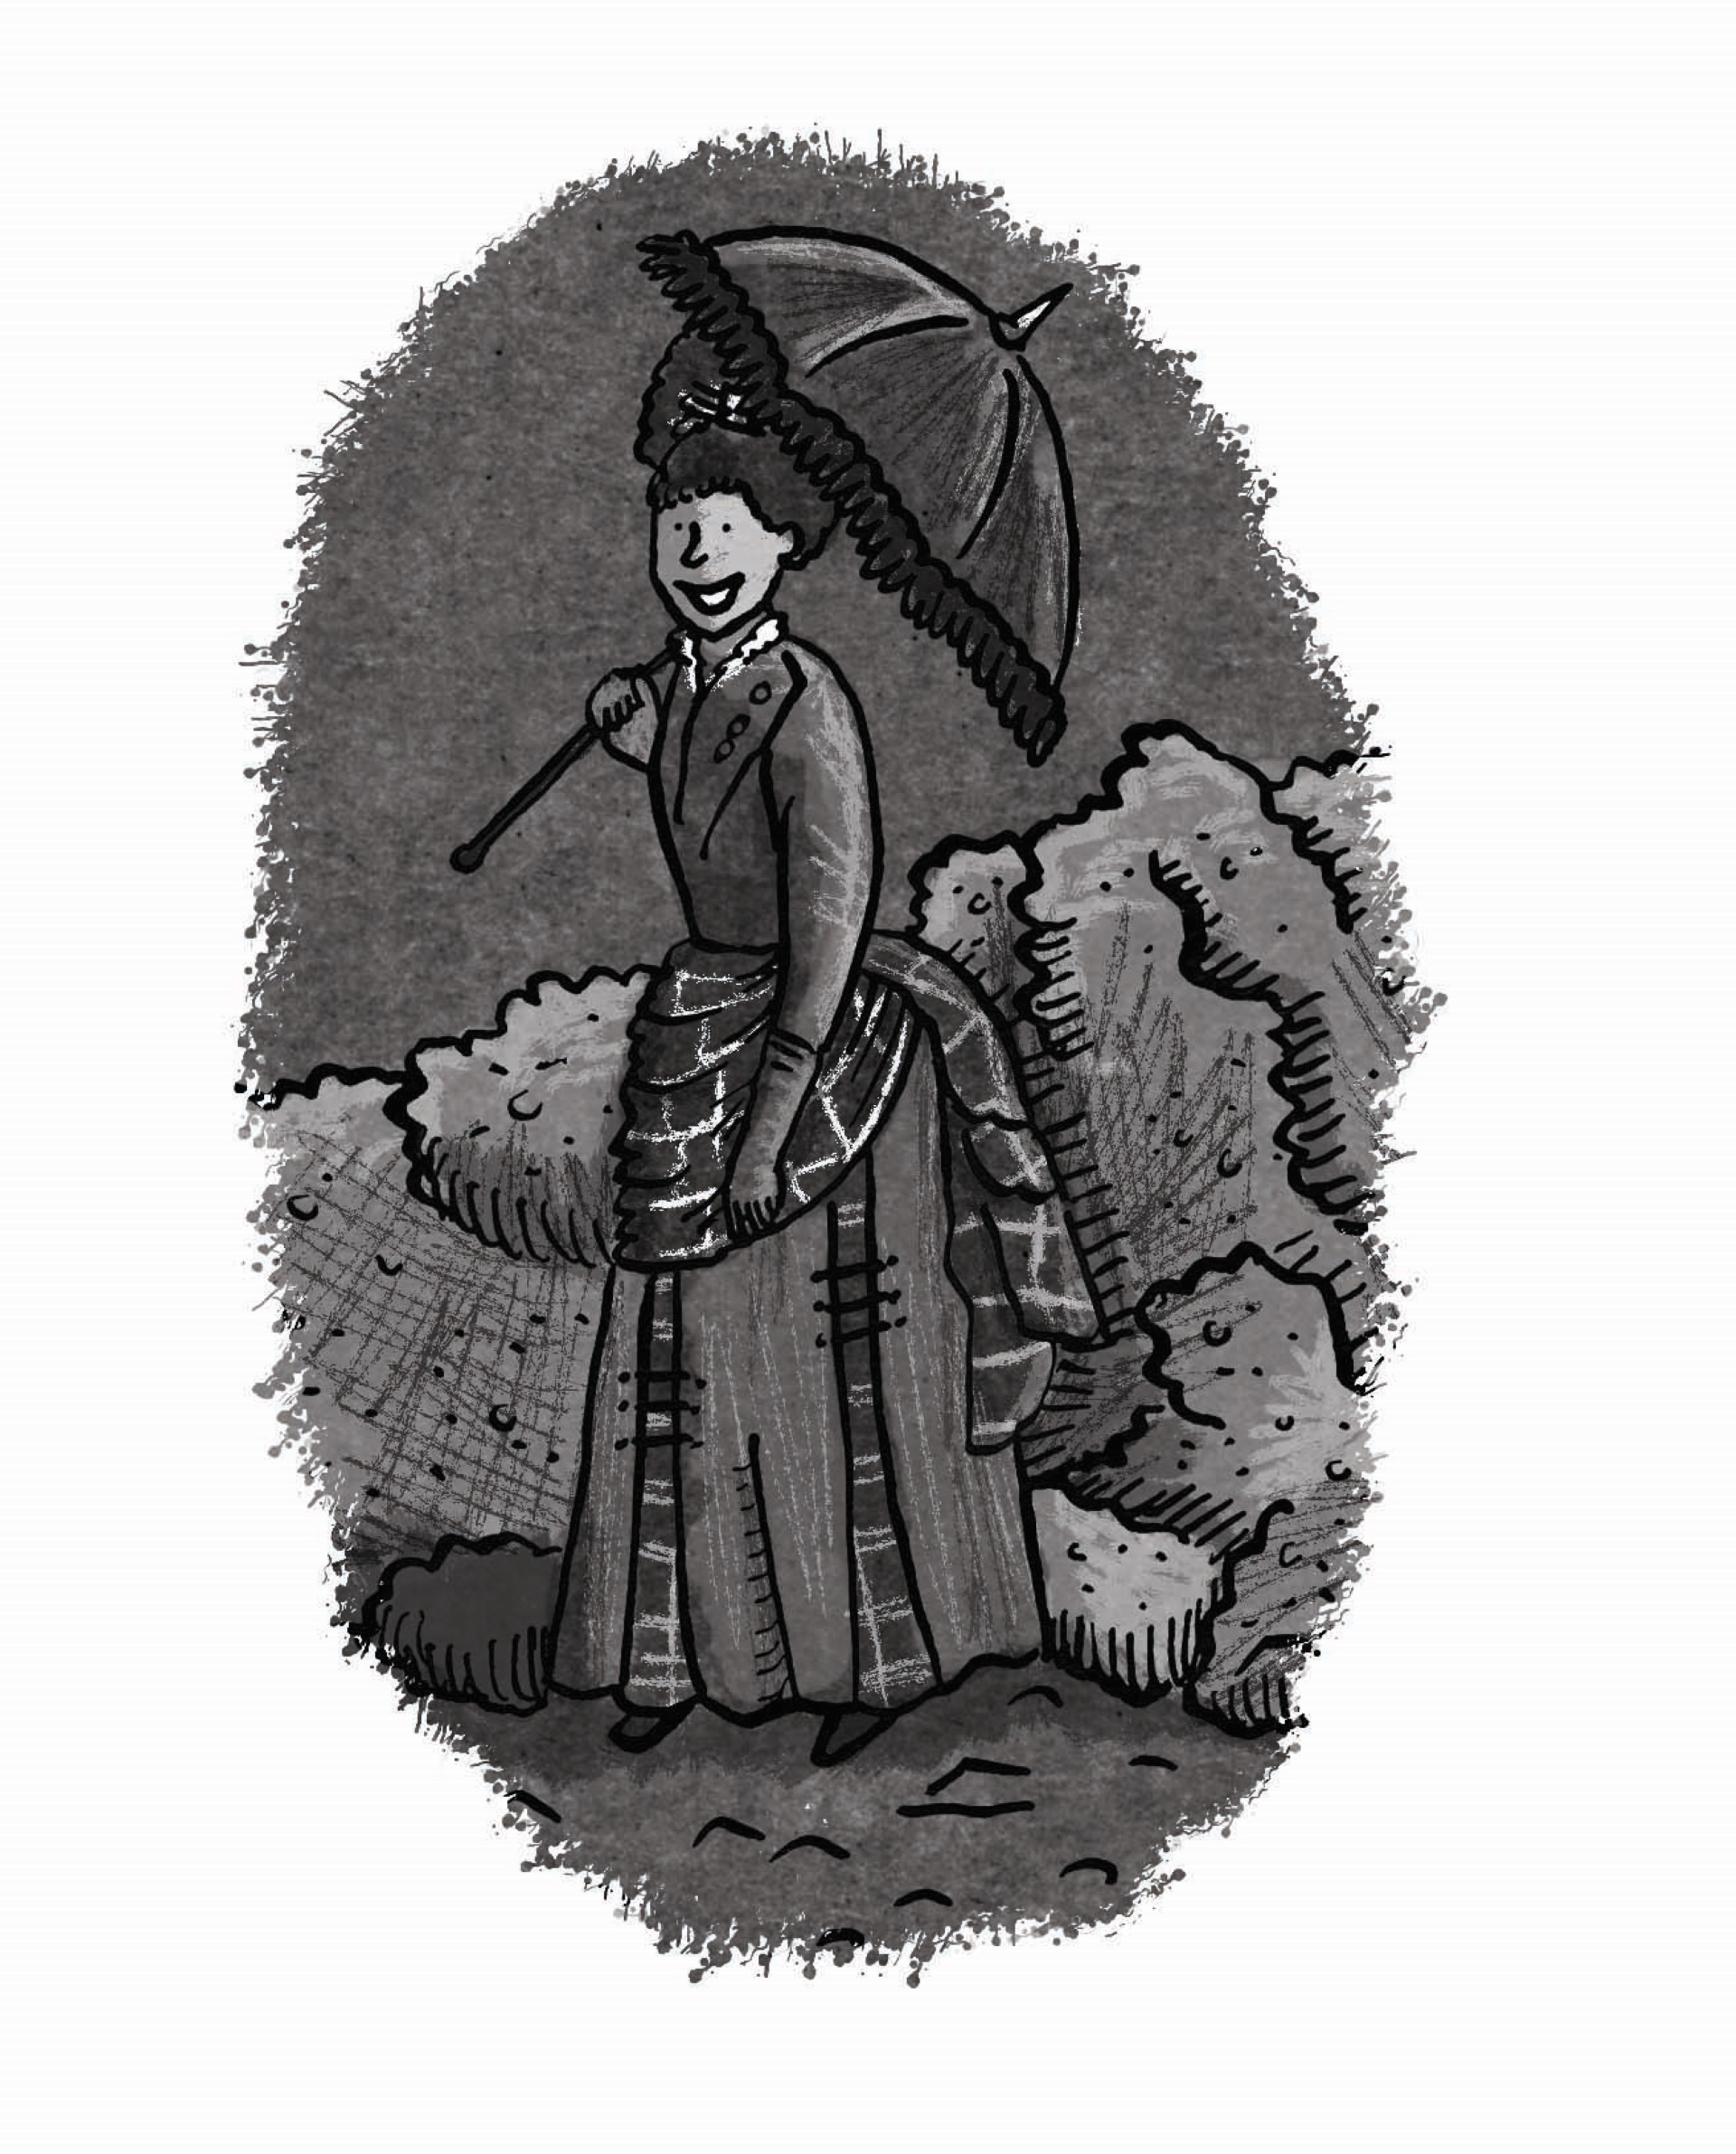 A cartoon of a woman in Victorian attire carrying a parasol in front of a volcanic landscape.